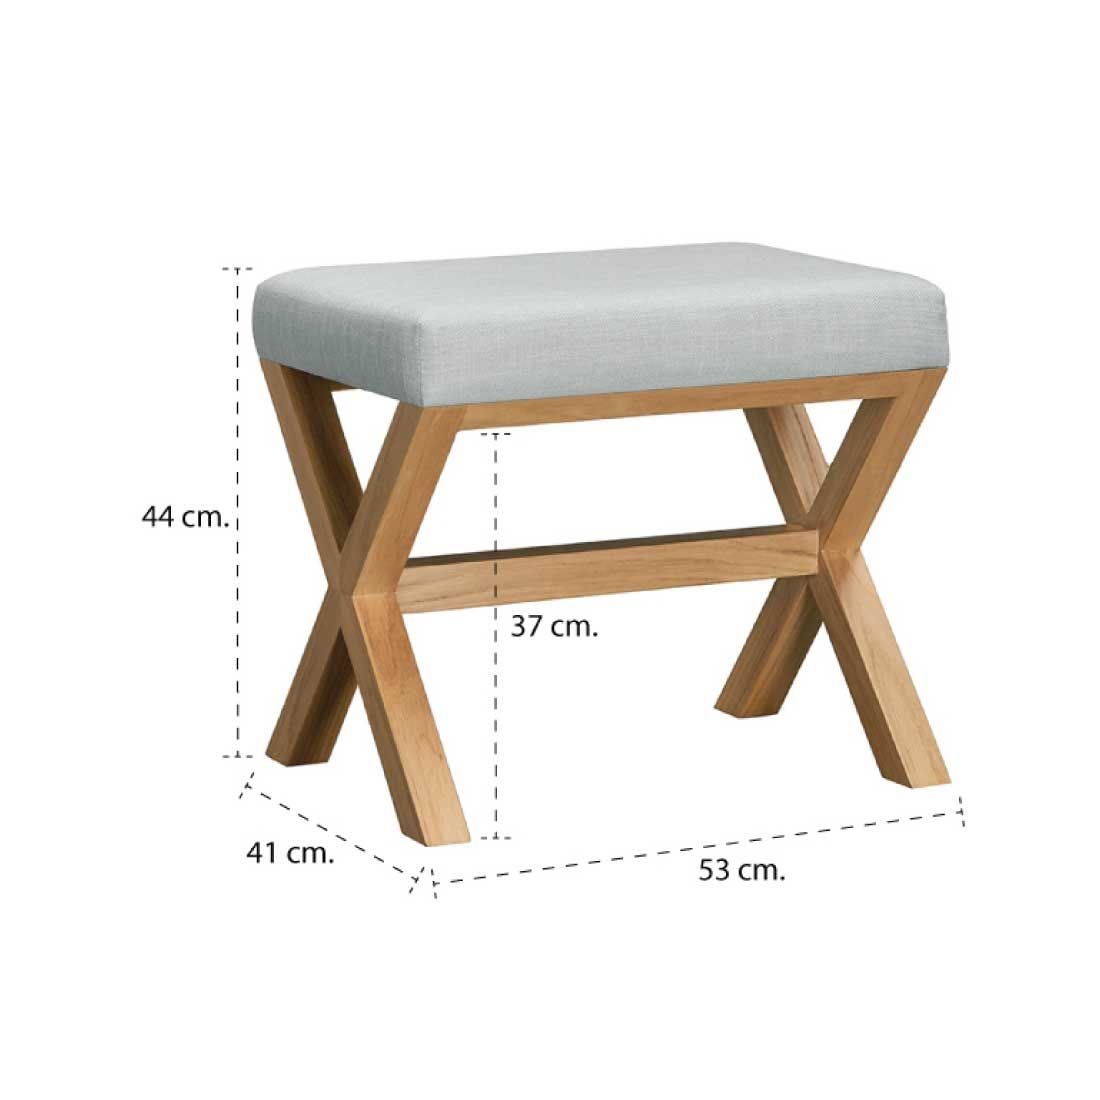 19203164-winshi-furniture-bedroom-furniture-stool-benches-01